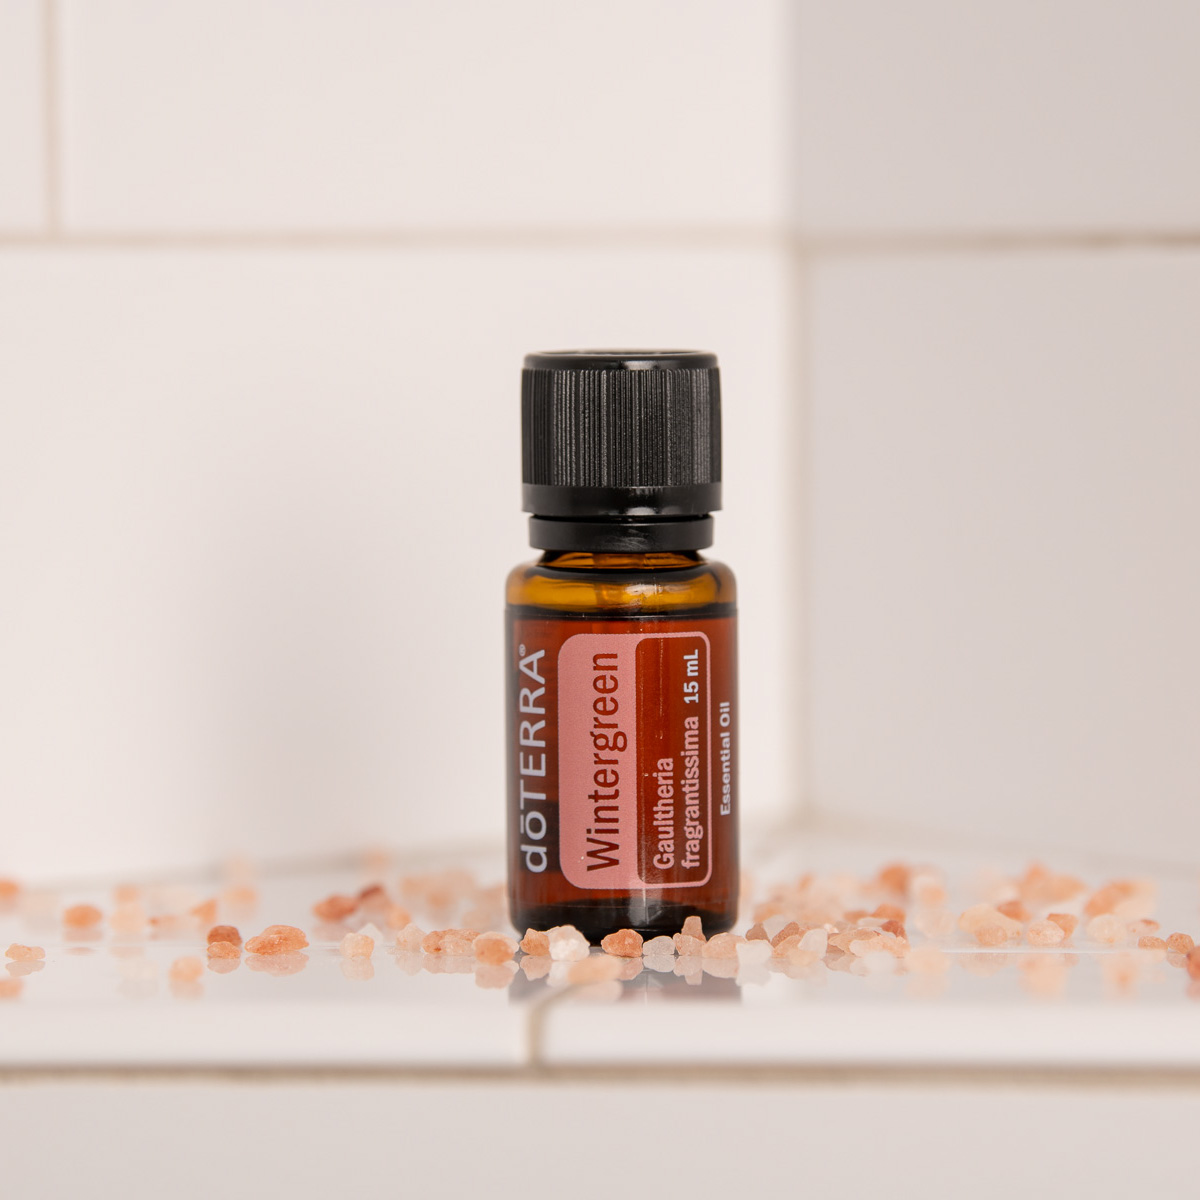 Wintergreen essential oil bottle surrounded by pink bath salts. What is Wintergreen oil? Wintergreen essential oil is derived from the leaves of a wintergreen shrub and has a sweet, minty, refreshing aroma.